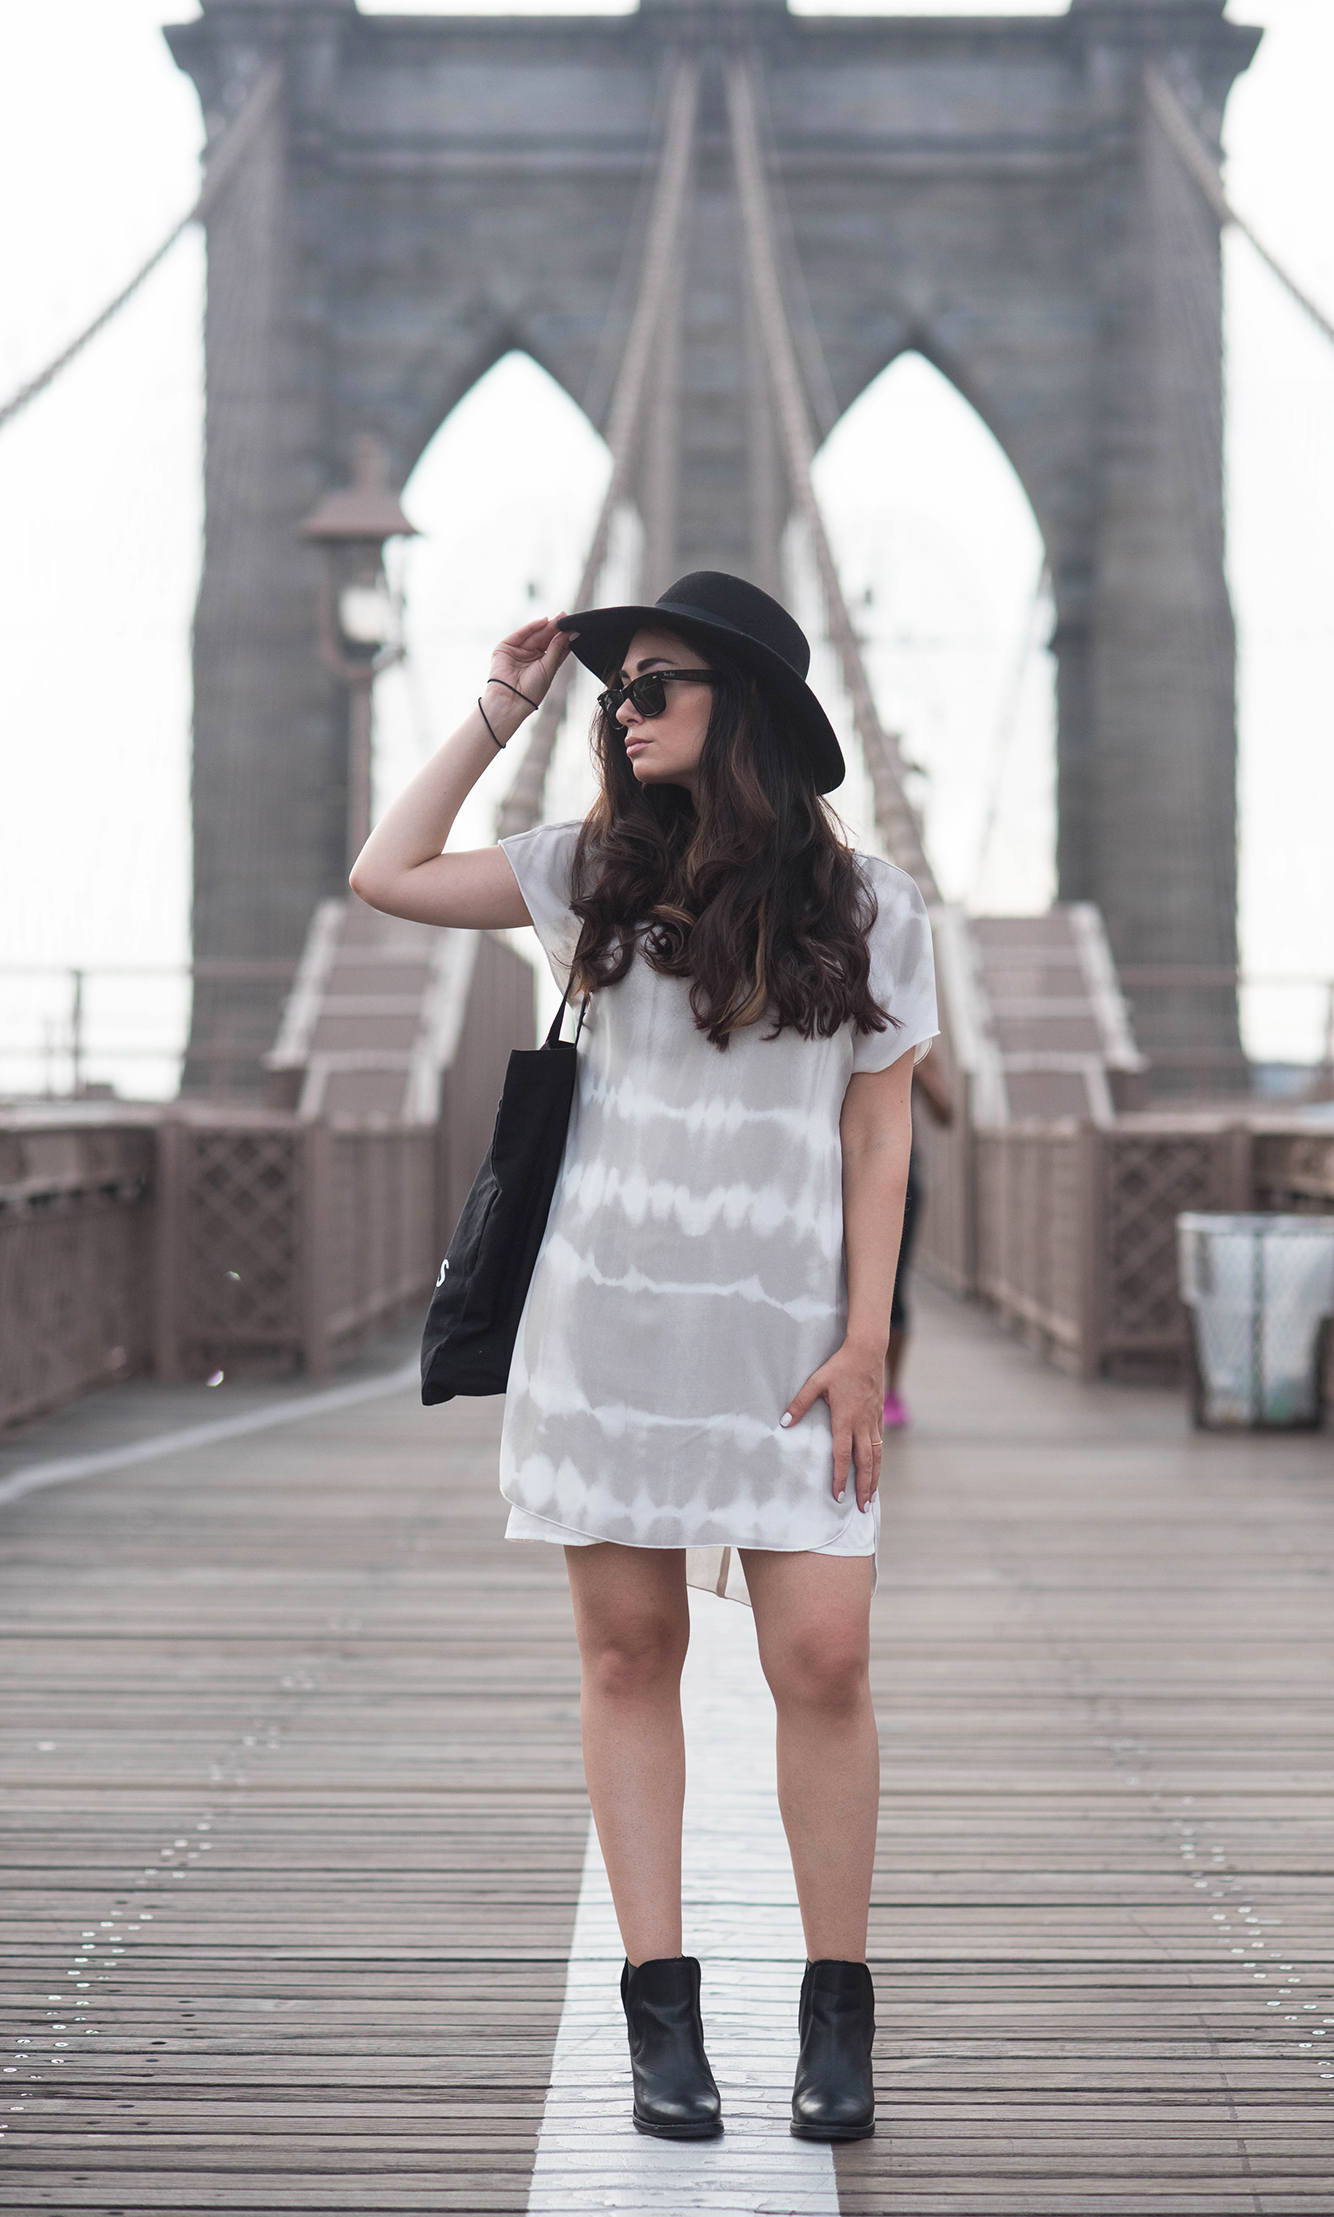 coco-and-vera-best-vancouver-fashion-blog-best-canadian-fashion-blog-top-blogger-street-style-nyc-gentlefawn-tie-dye-dress-topshop-boots-hm-hat-rayban-wayfarer-sunglasses